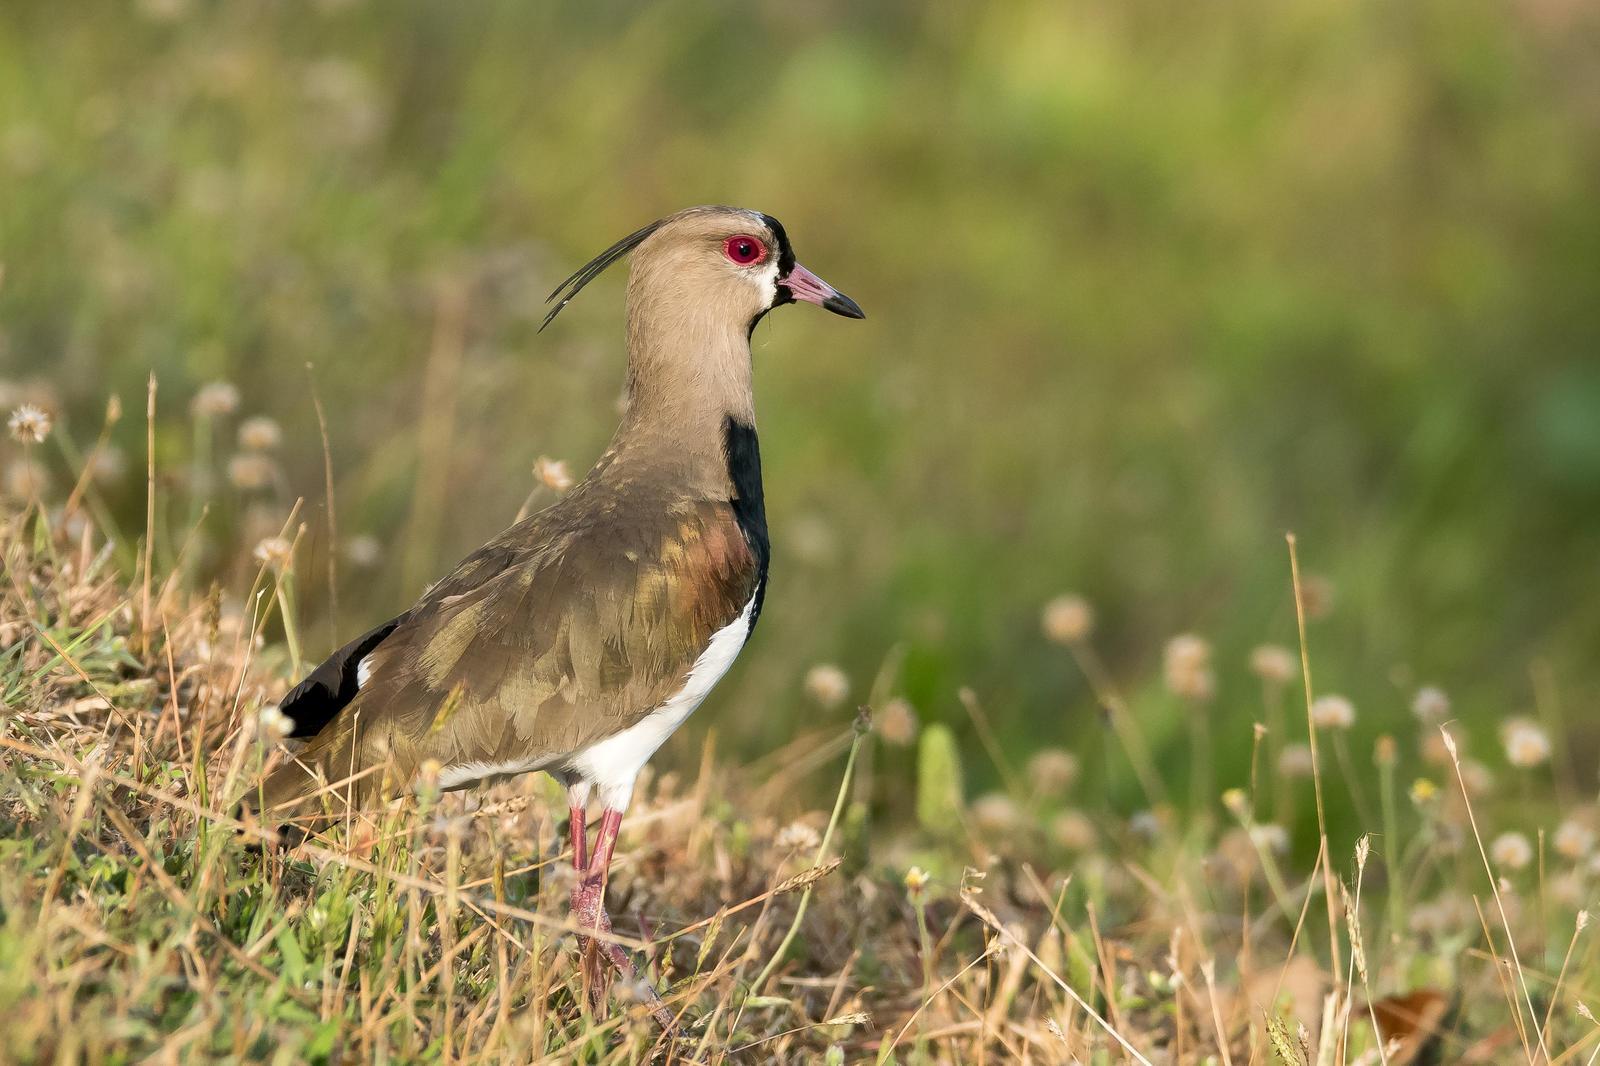 Southern Lapwing Photo by Gerald Hoekstra